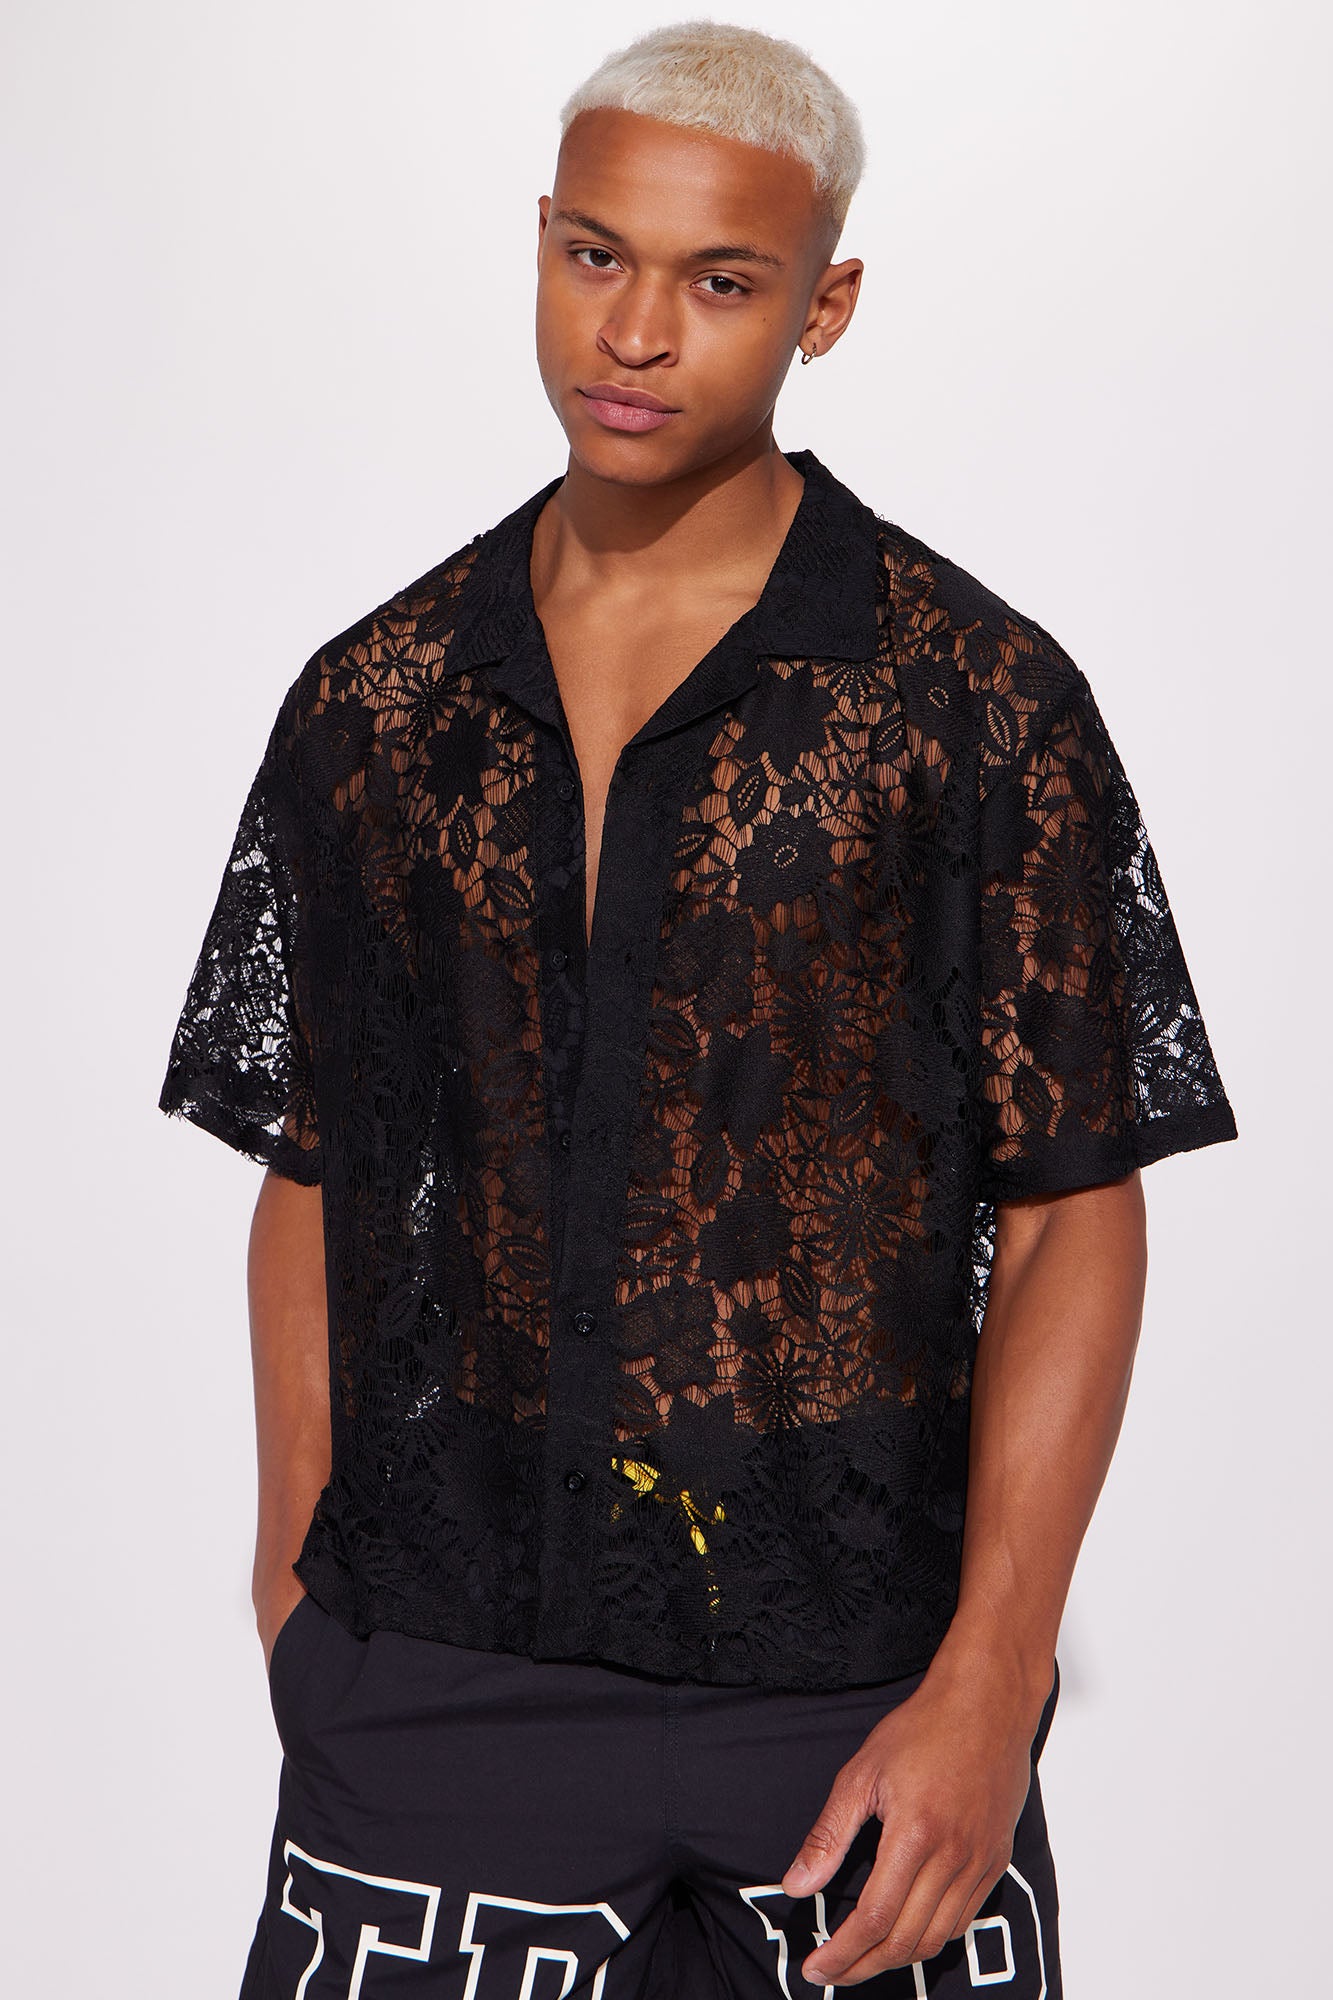 Men's Into The Floral Cropped Tapestry Short Sleeve Button Up Shirt in Black/Combo Size XL by Fashion Nova